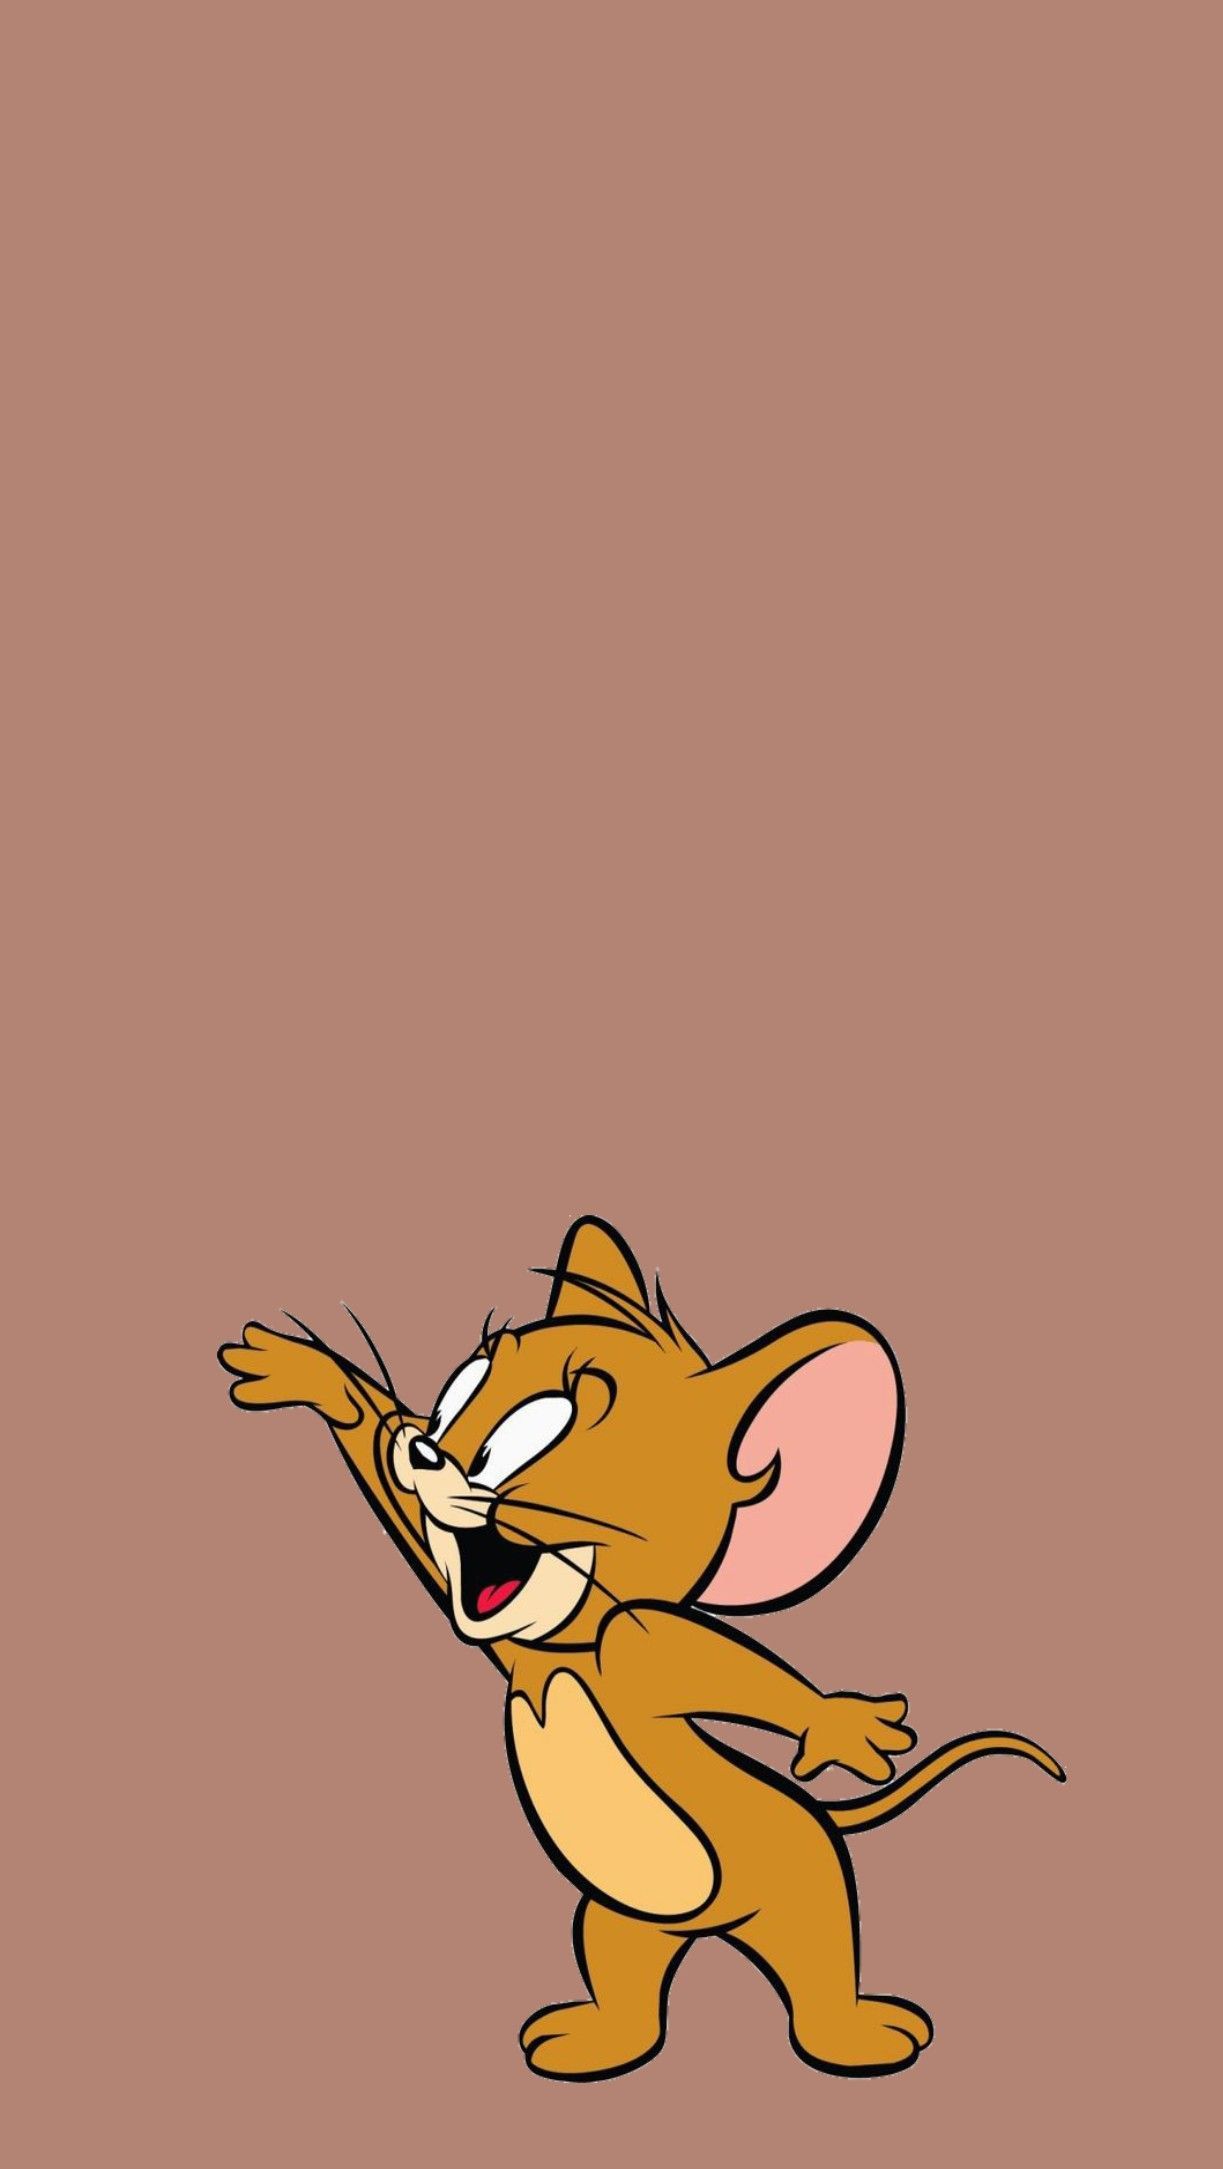 Jerry the mouse from Tom and Jerry wallpaper - Tom and Jerry